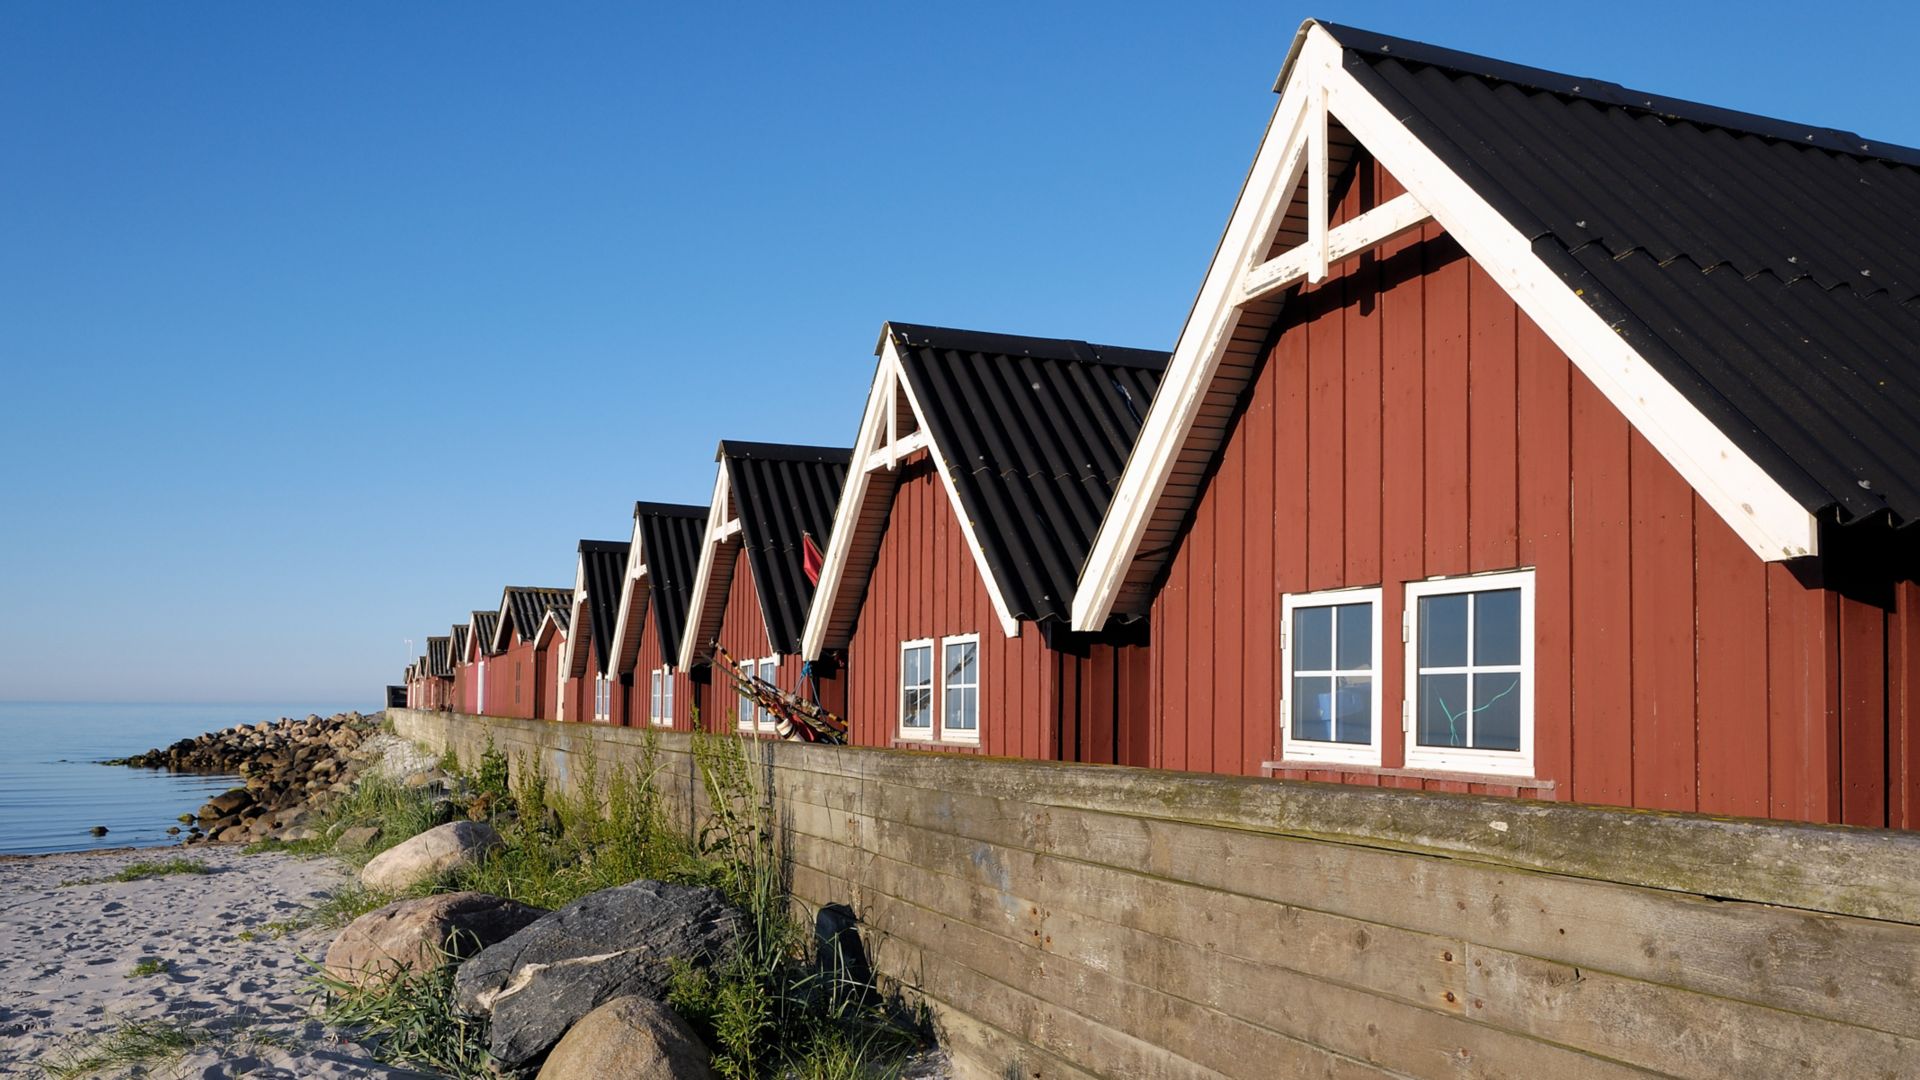 Red walled fishing huts backing on to a small beach at Strandby Harbour in Denmark.